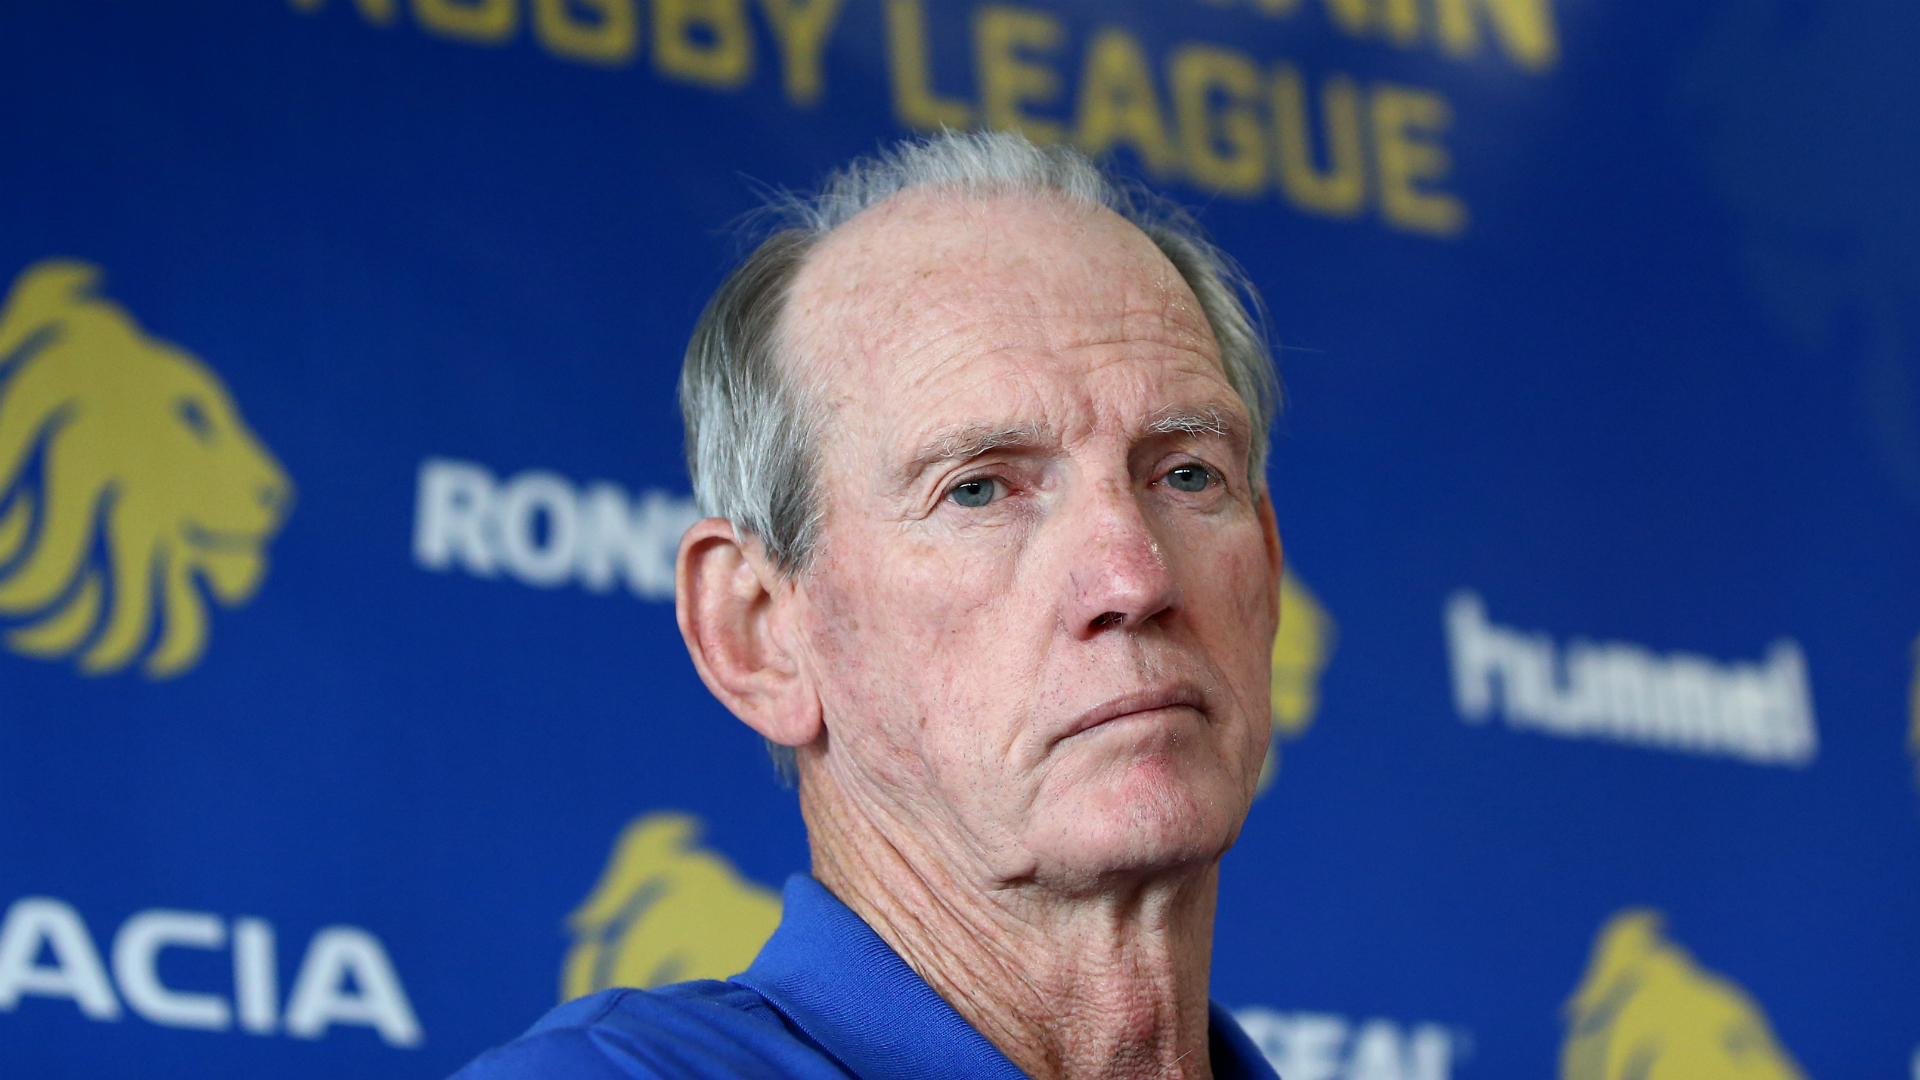 England and Great Britain coach Wayne Bennett was "wrong" to link NRL moves with the prospect of international honours, Robert Elstone said.